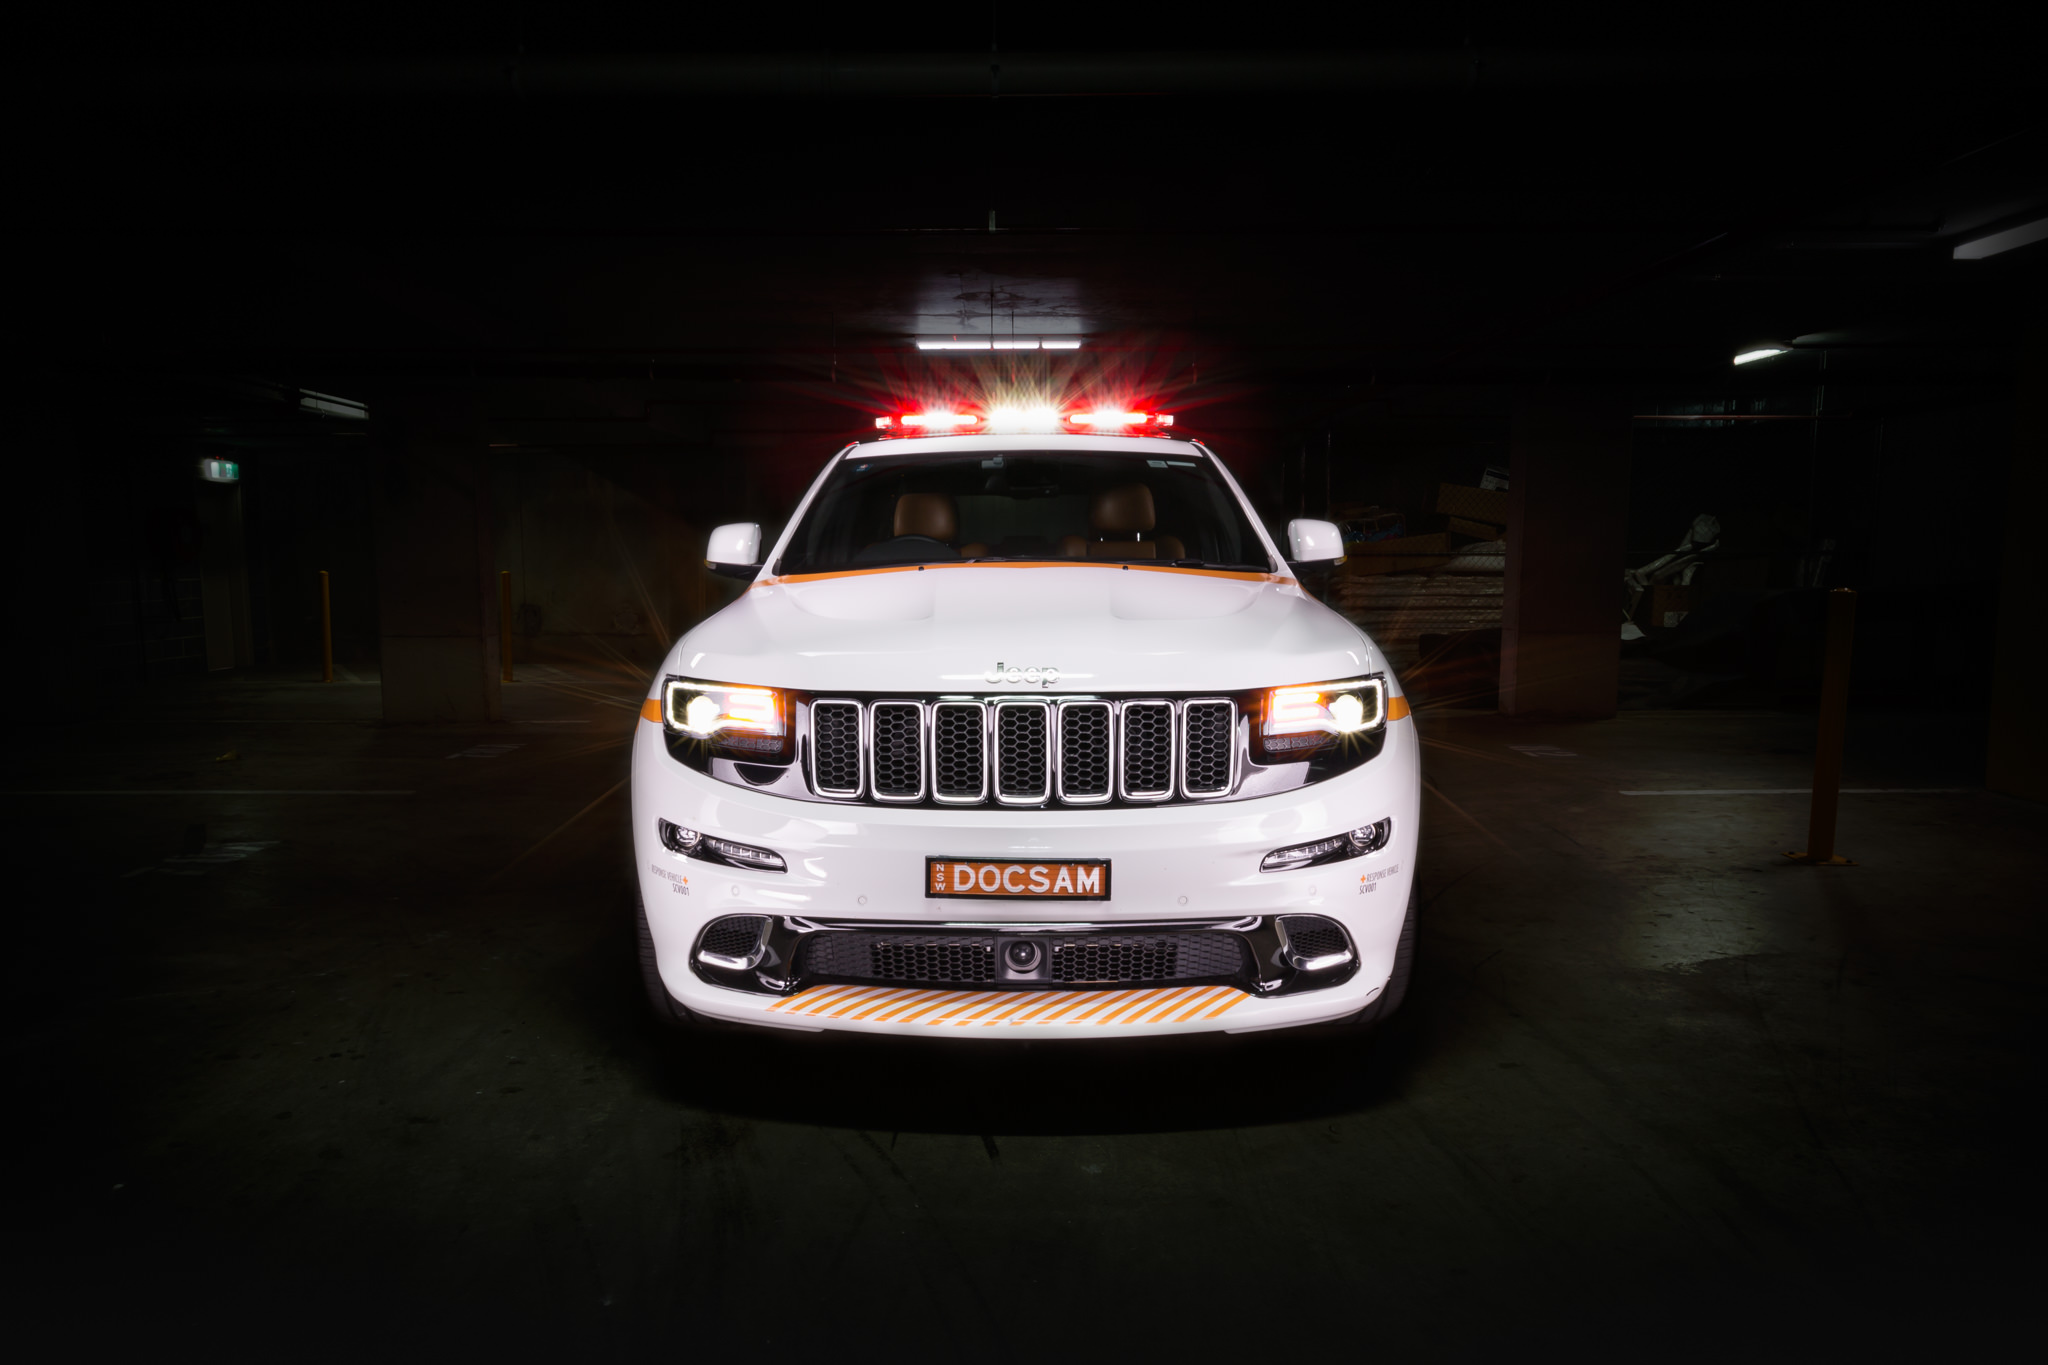 Southern Cross Vet Response Vehicle Grill, Jeep Grand Cherokee Car Photography